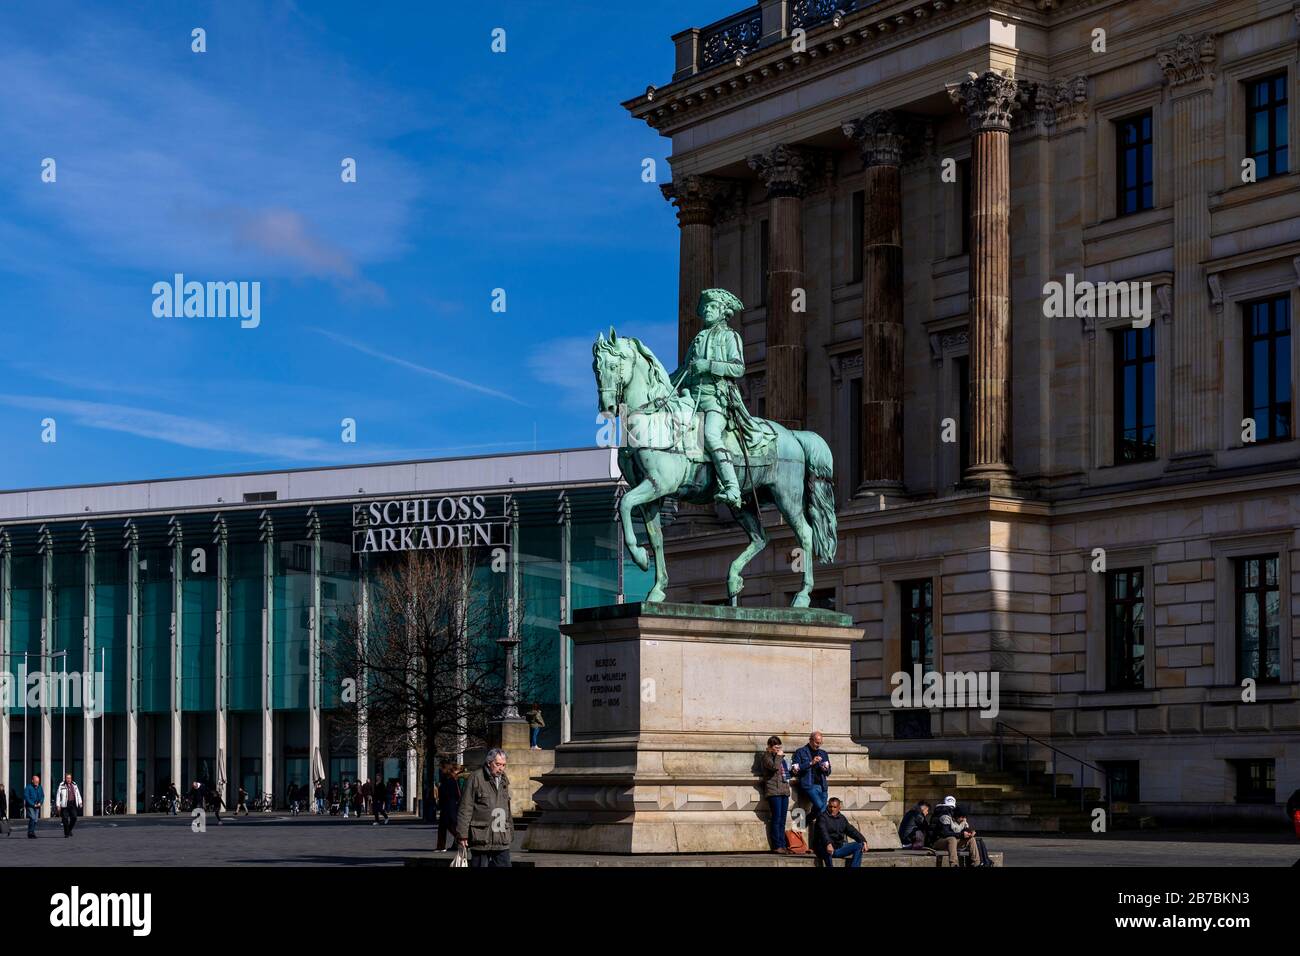 Page 2 - Arkaden High Resolution Stock Photography and Images - Alamy